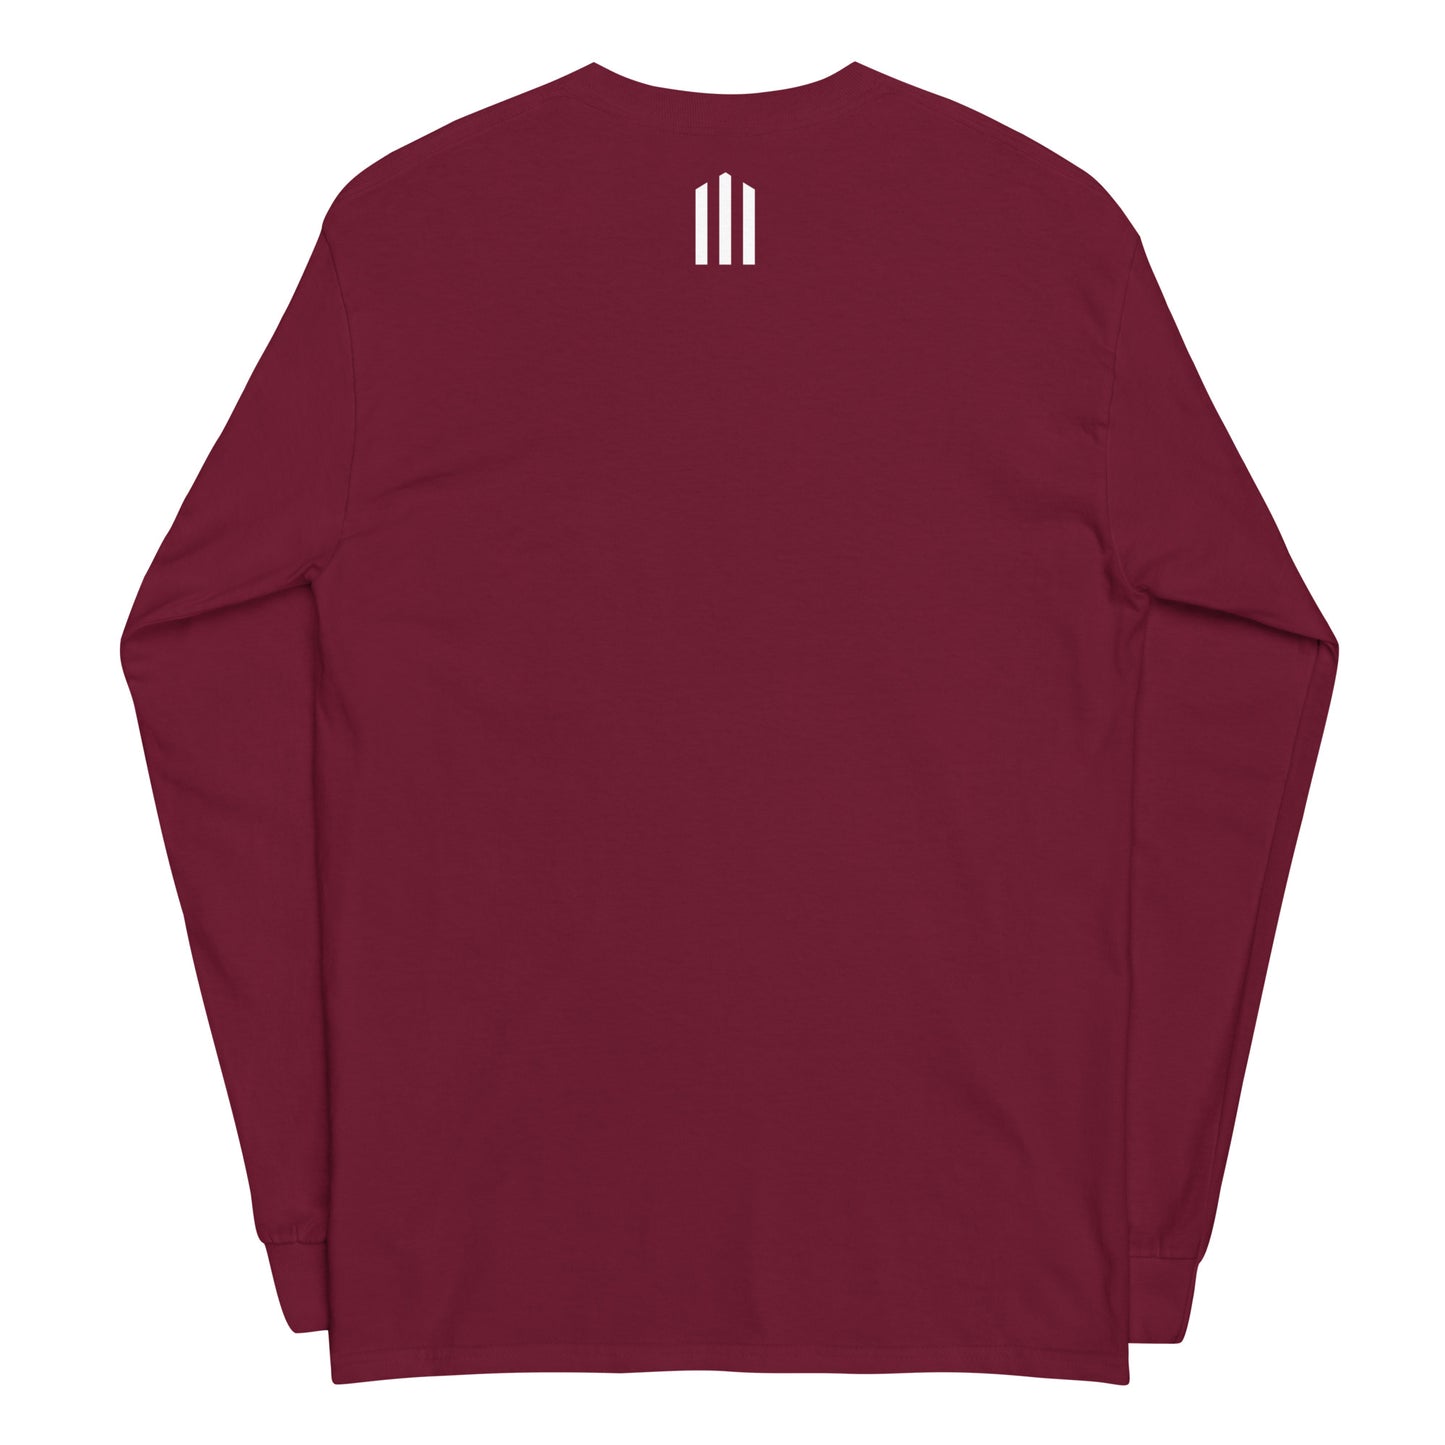 God + Therapy Long-Sleeve Shirt